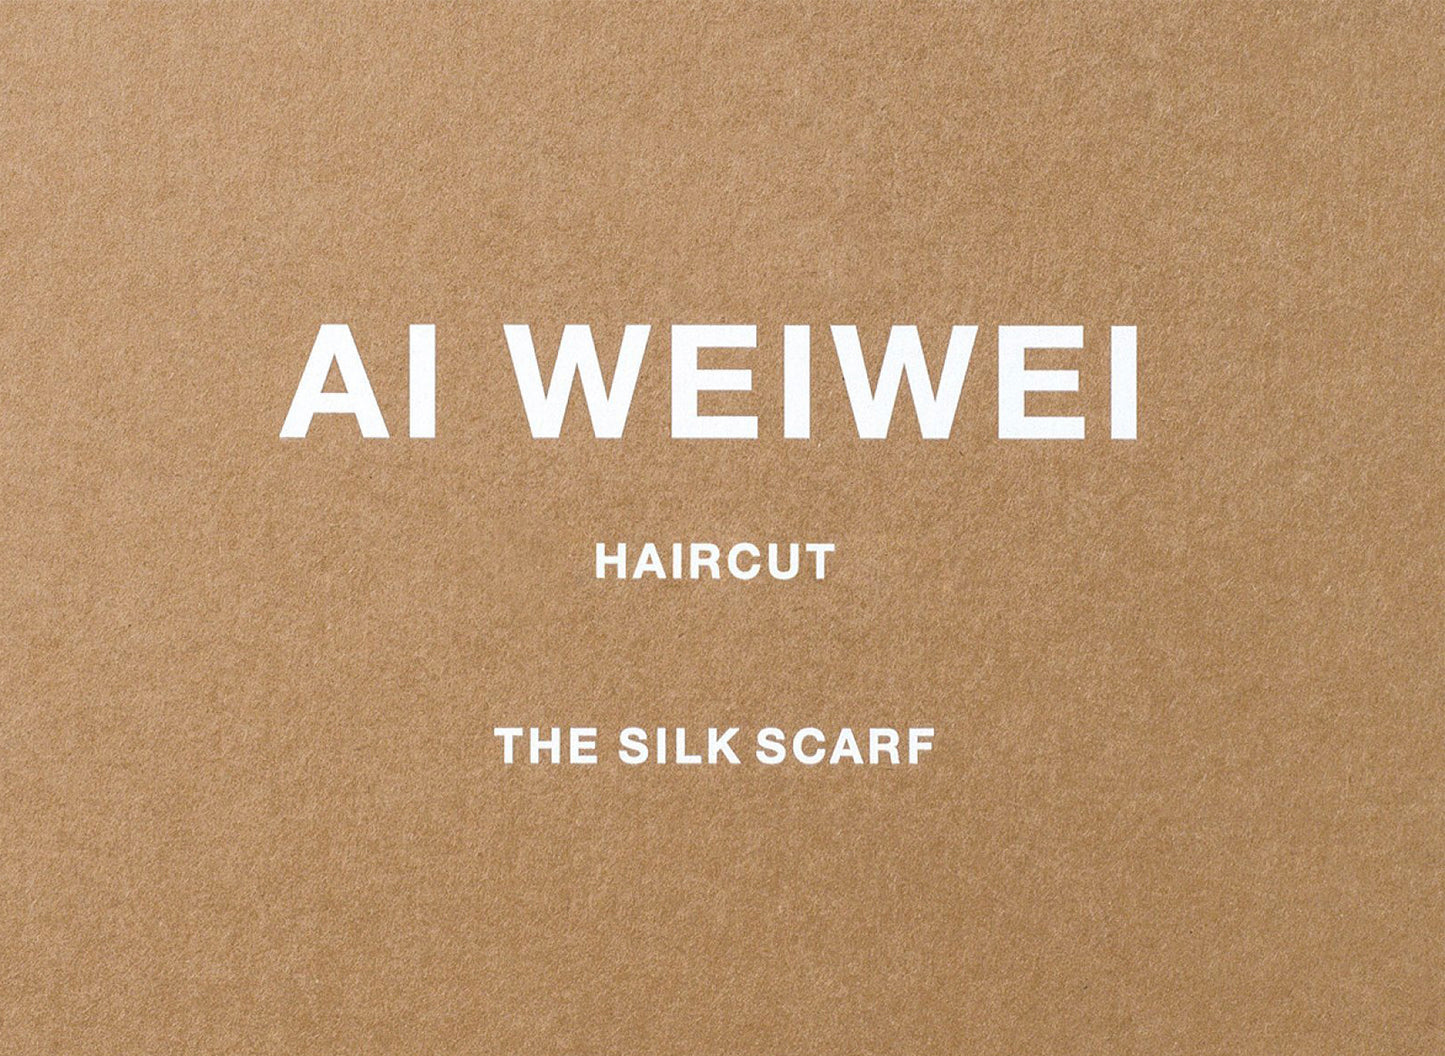 Taschen Limited Edition 'Haircut' Scarf by Ai Weiwei